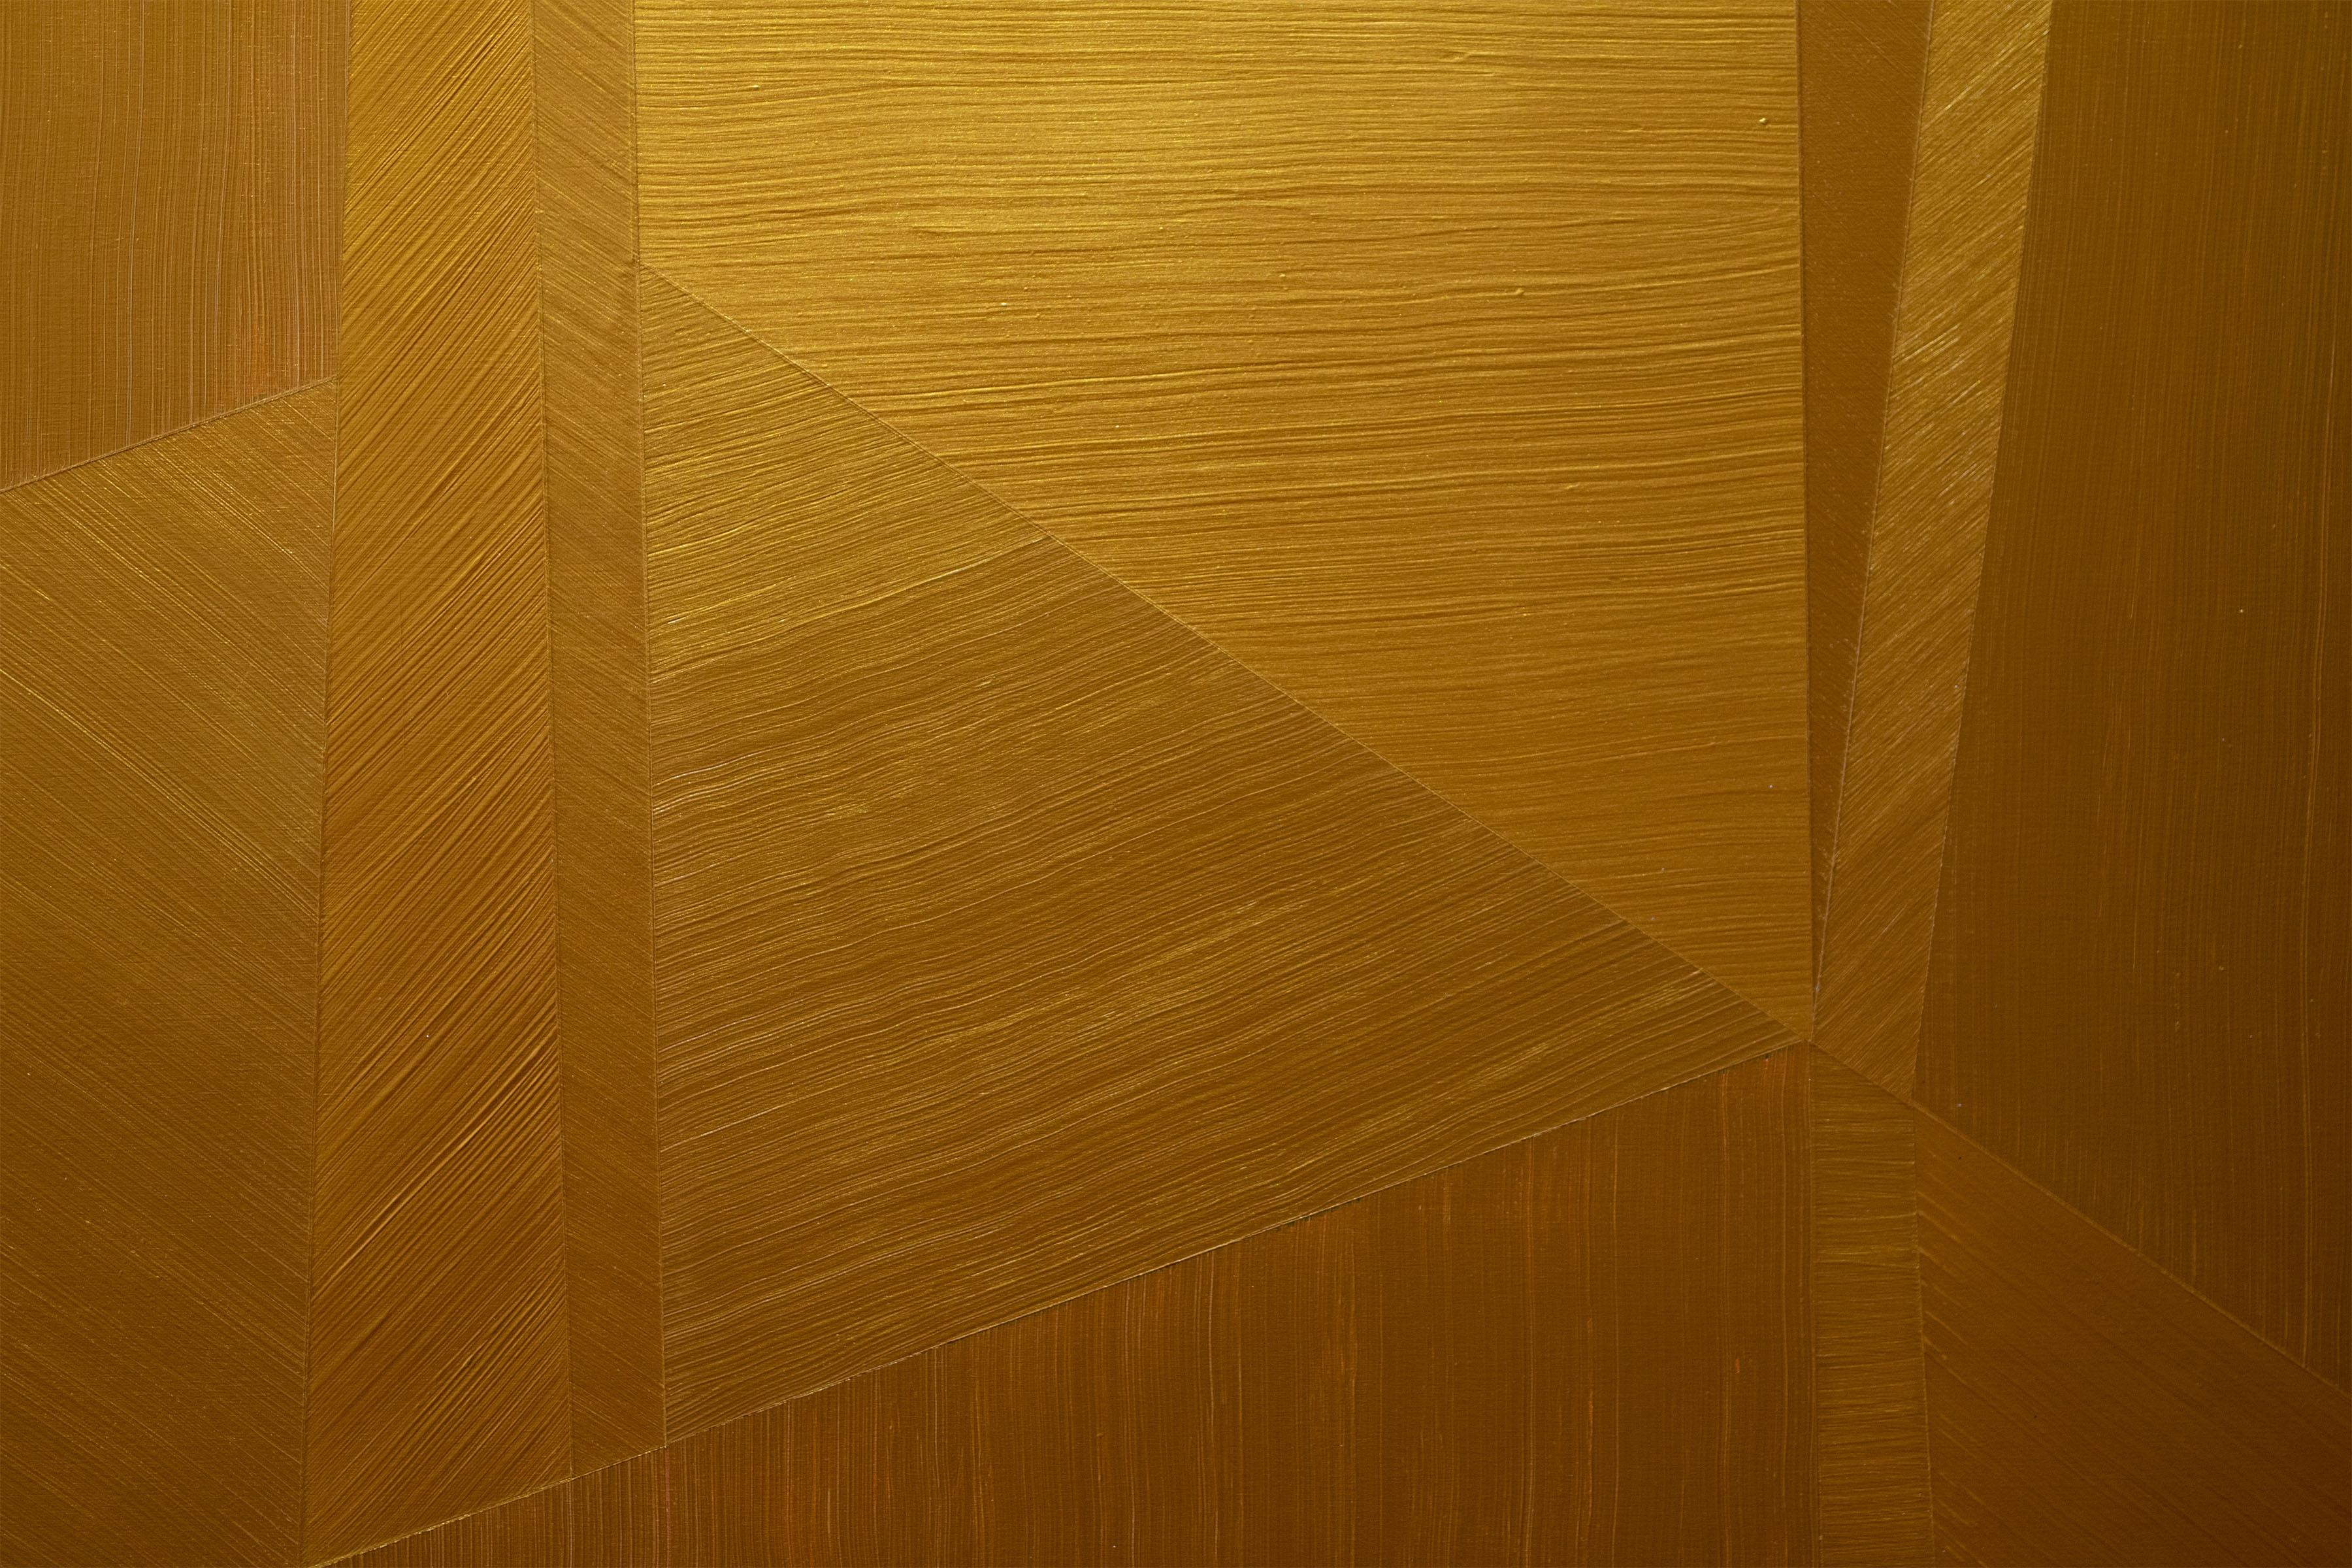 In Kal Mansur's new series of gold paintings he continues his exploration of changing perspectives.

His idea that most of our “differences” would be viewed as similarities with a simple change of viewing angle has been reduced to the minimum number